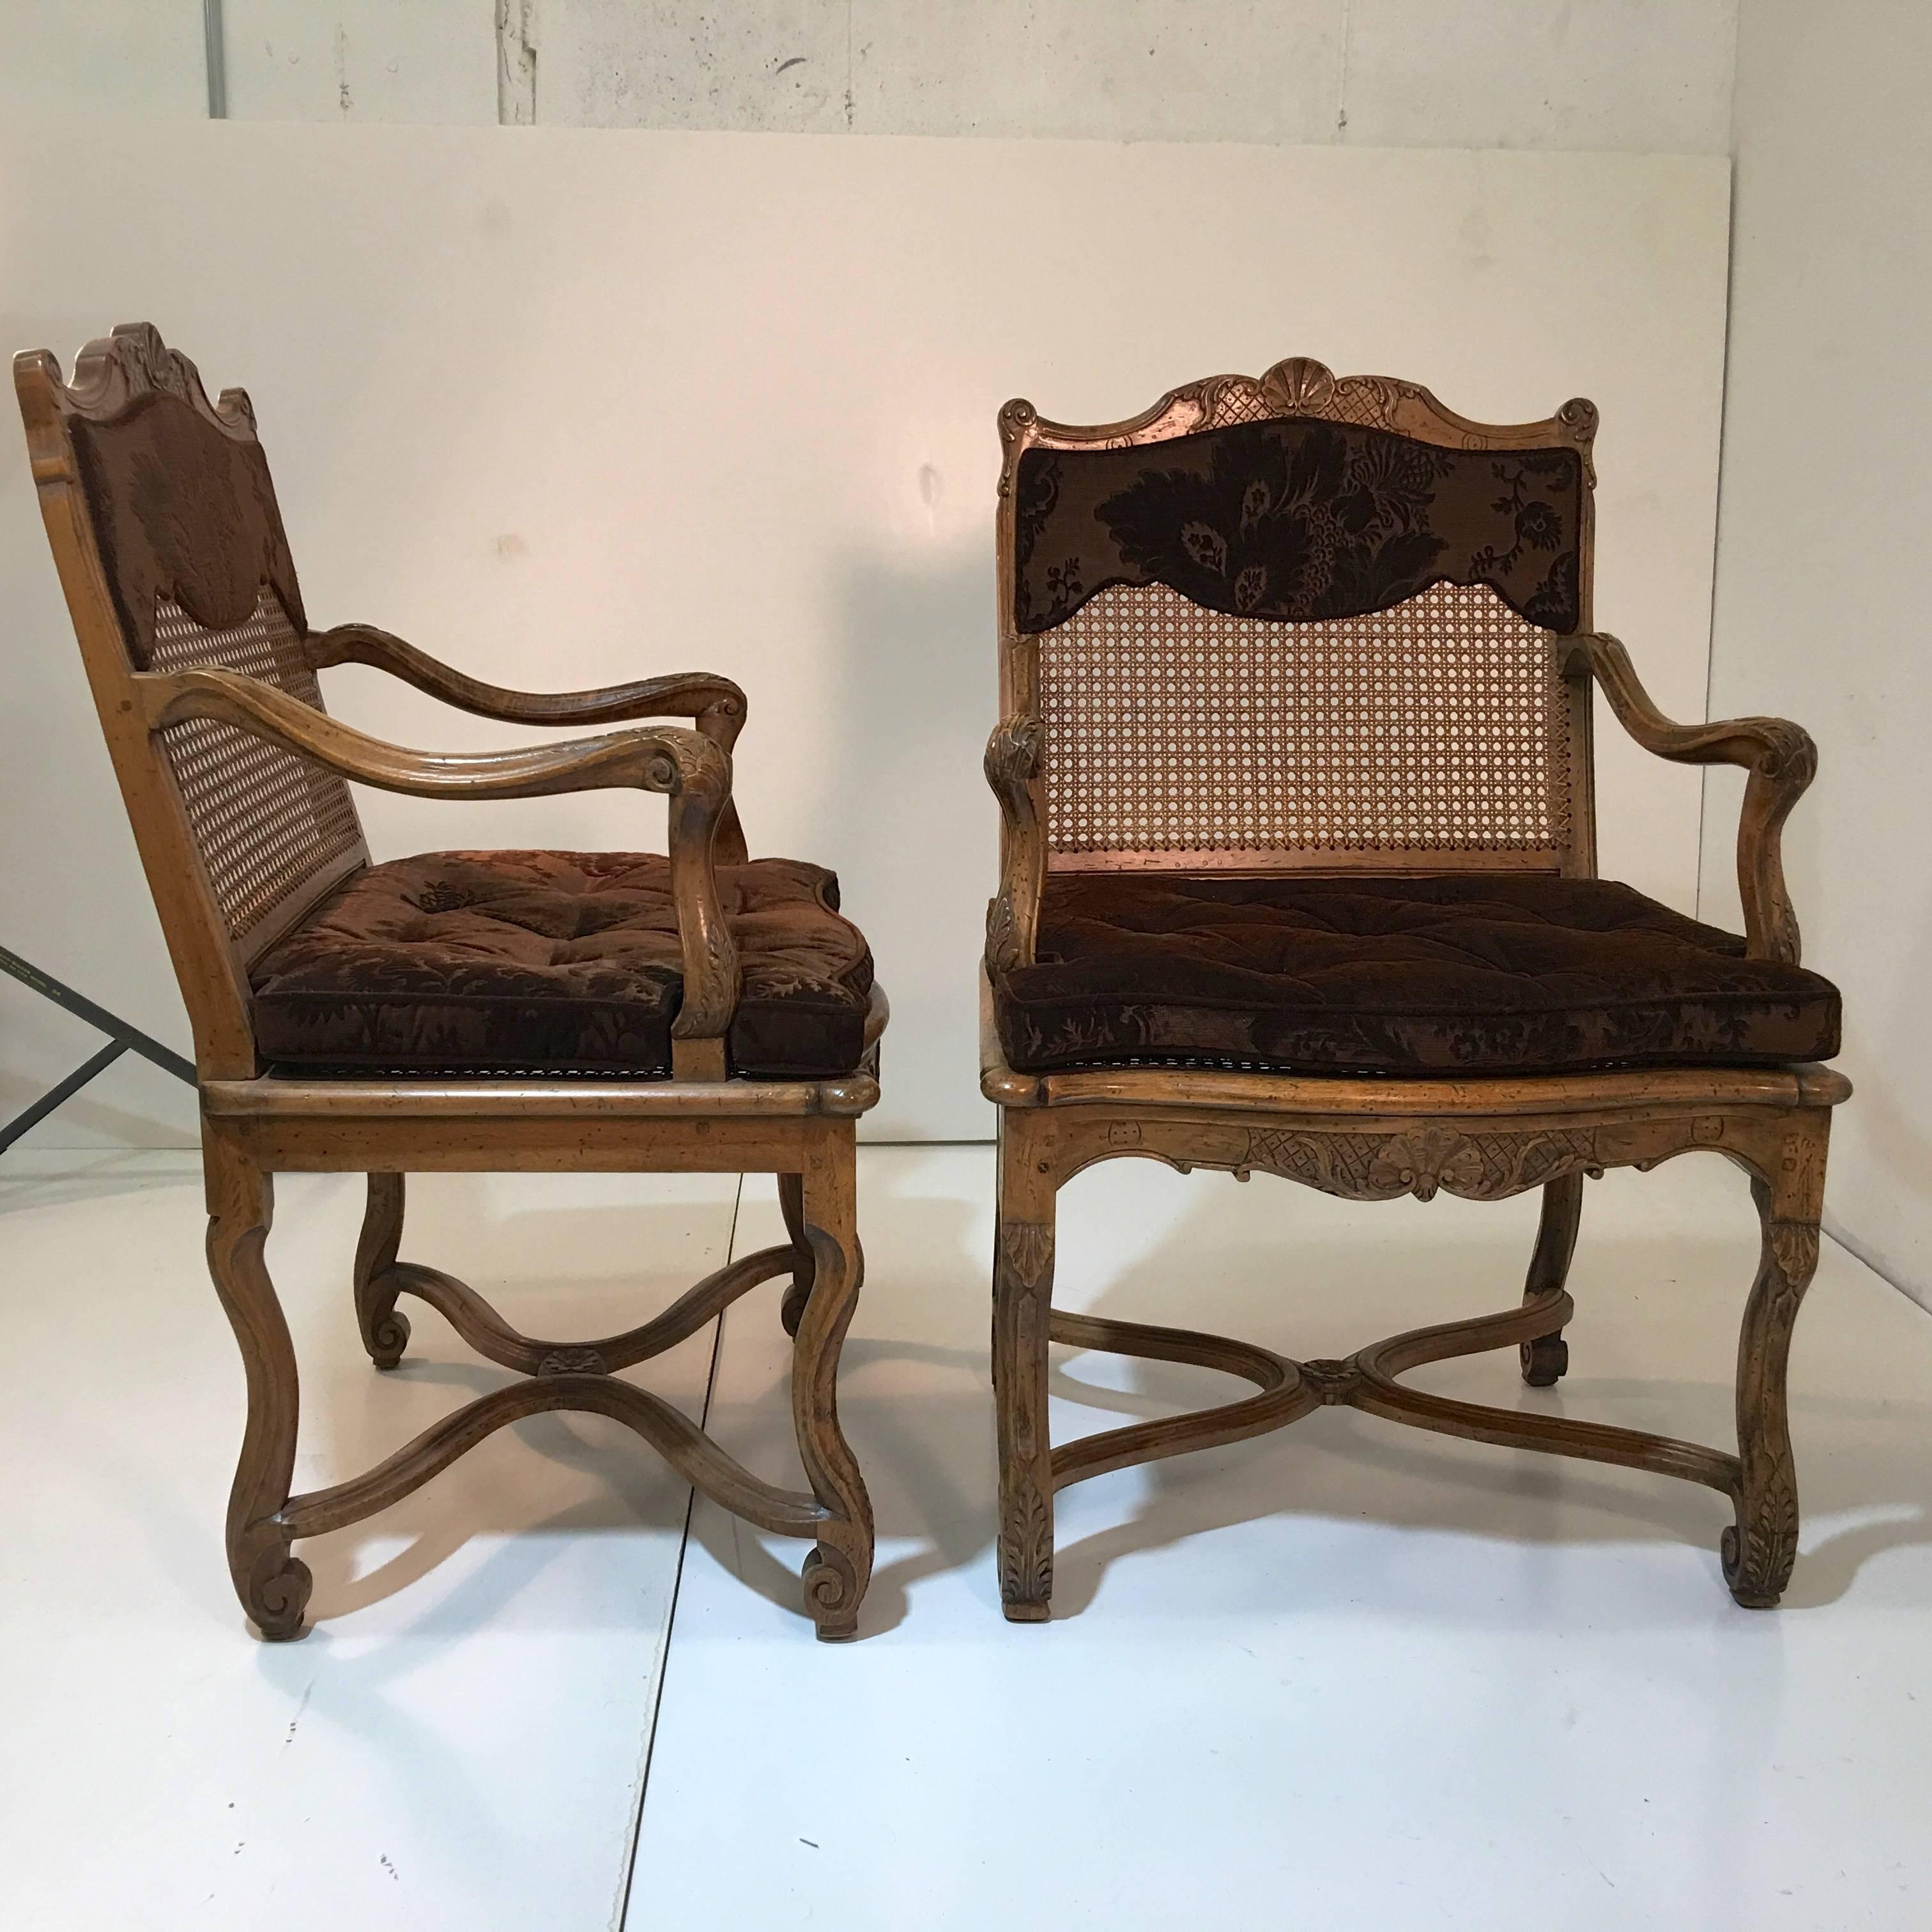 Set of ten dining armchairs by legendary carver Don Ruseau Inc., New York City. 
Provincial Louis XV style with caned backs and seats. Hand carved and all joints pegged, not glued. 
Fitted with custom seat cushions in brown cut velvet. (Comes with